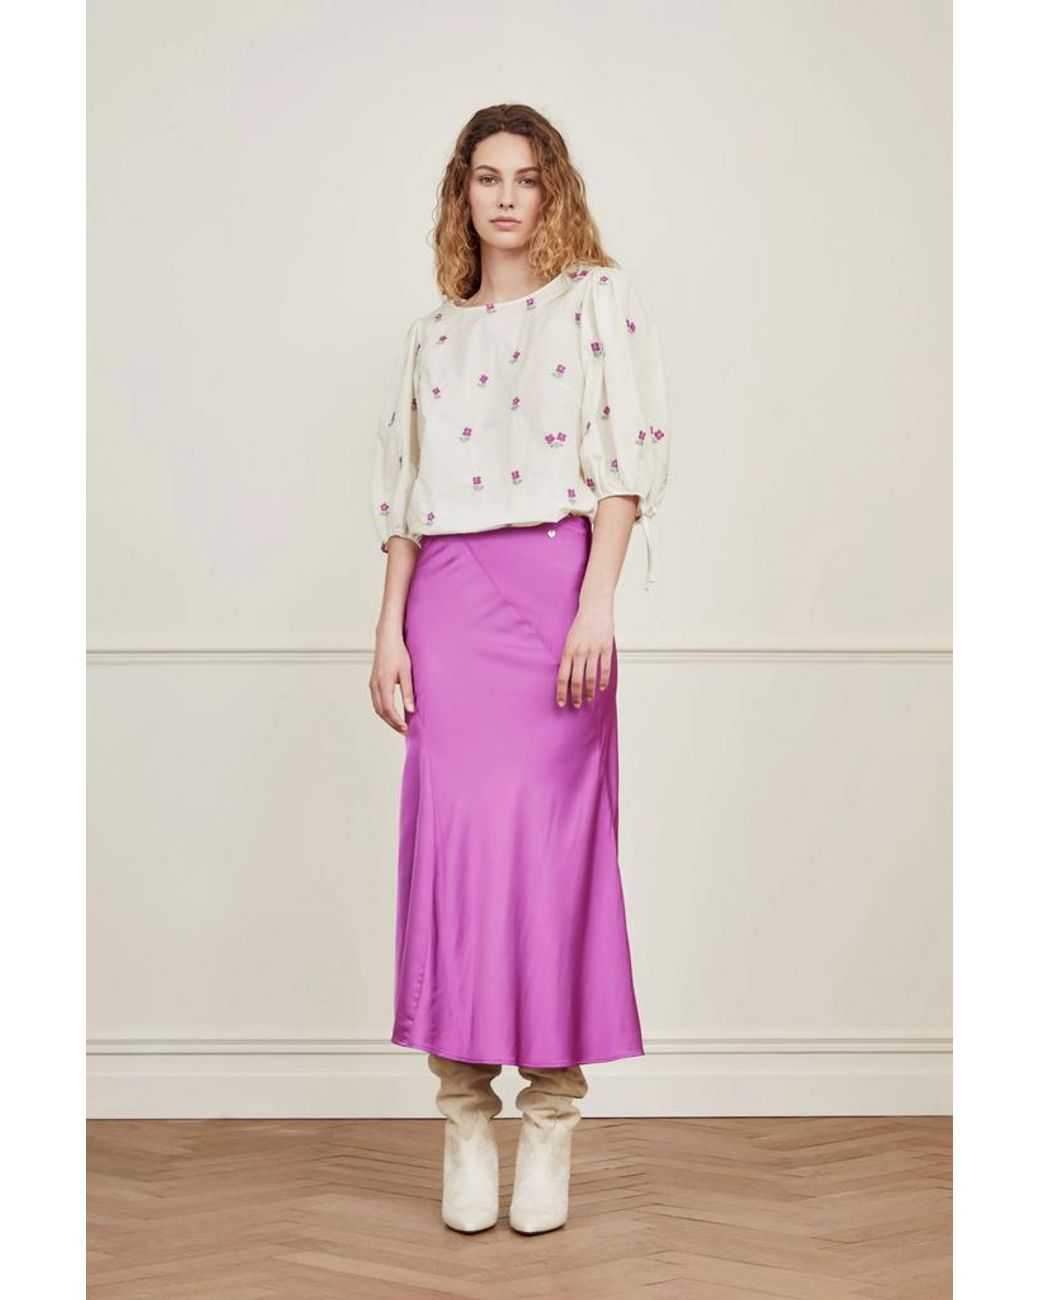 FABIENNE CHAPOT Synthetic Suzy Skirt in Pink | Lyst Canada